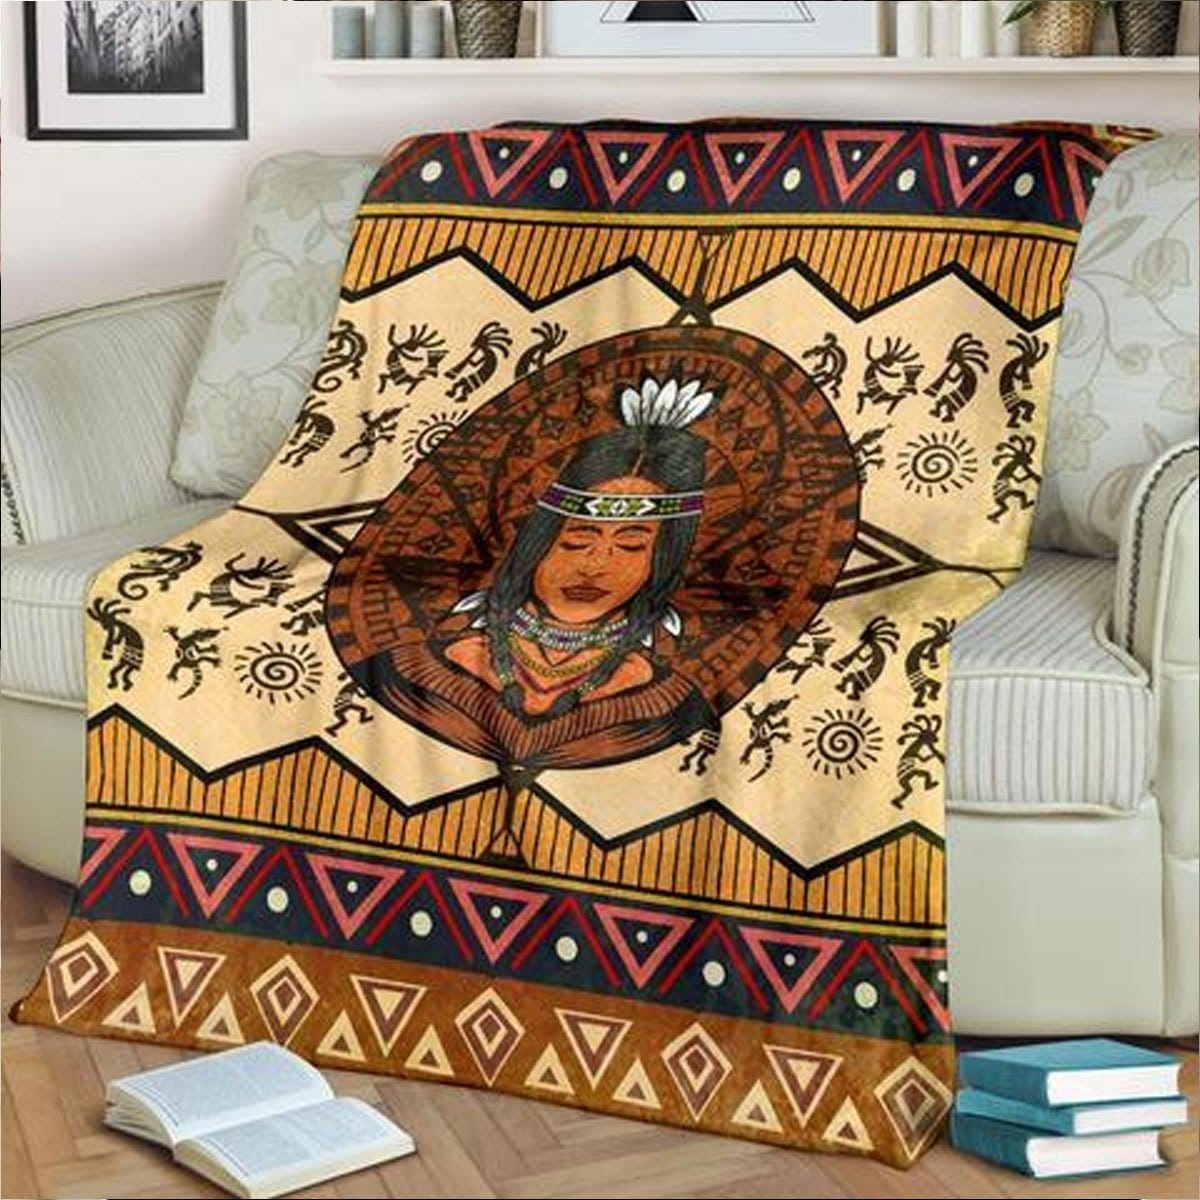 Native American Cultures and Clothing: Native American Is Not a